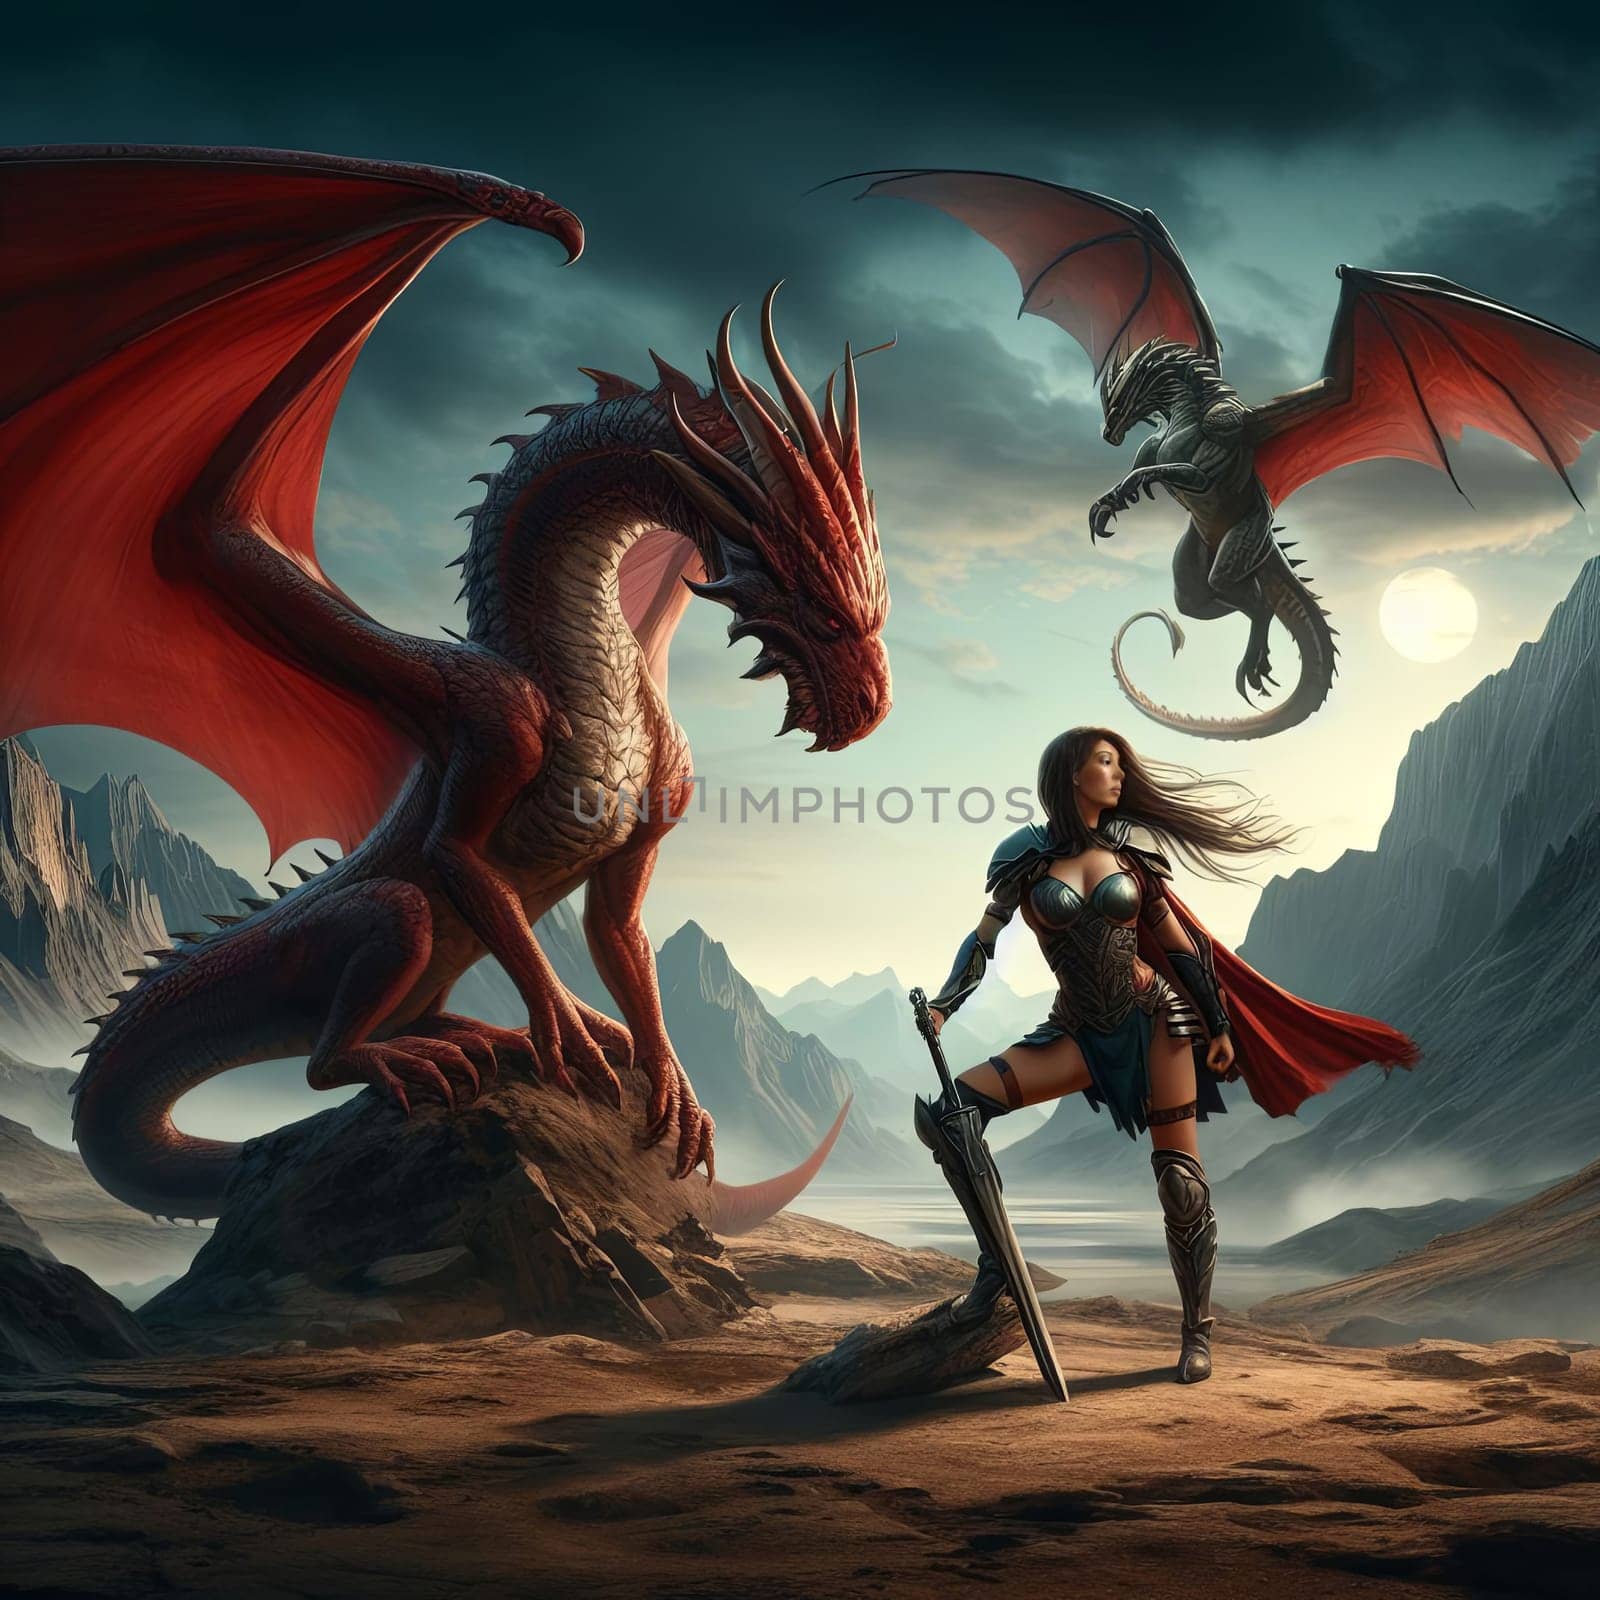 Fantasy illustration of a warrior woman facing two dragons in a desert landscape